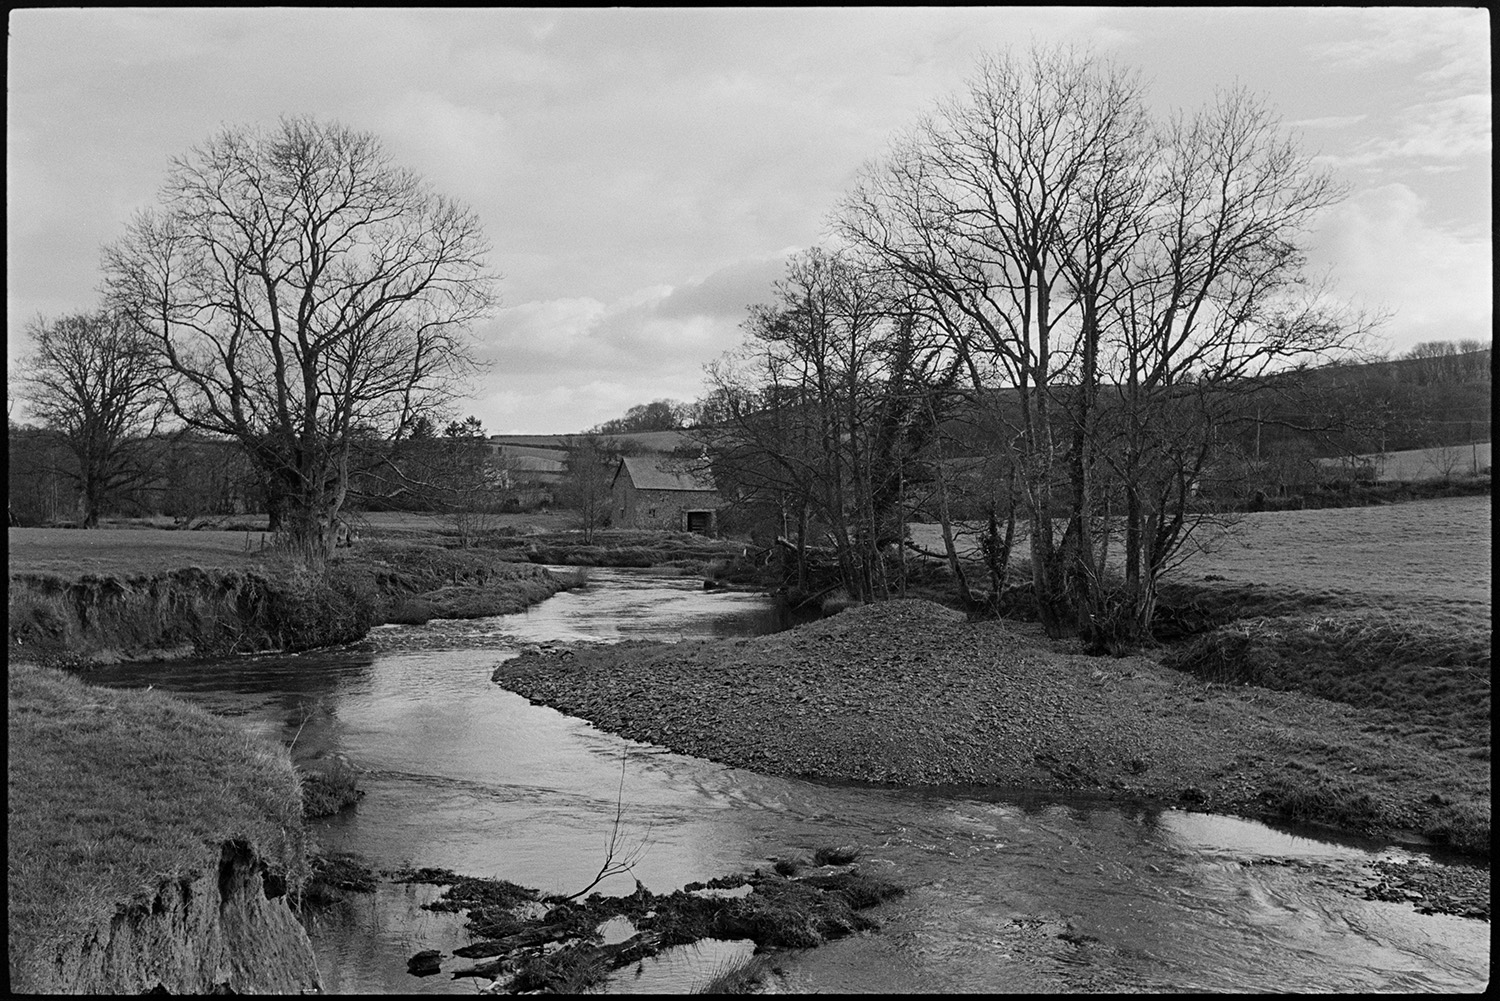 River view with old mill in distance.
[A view along the River Taw at Rashleigh Mill, Bridge Reeve. The river is lined with trees and fields.]